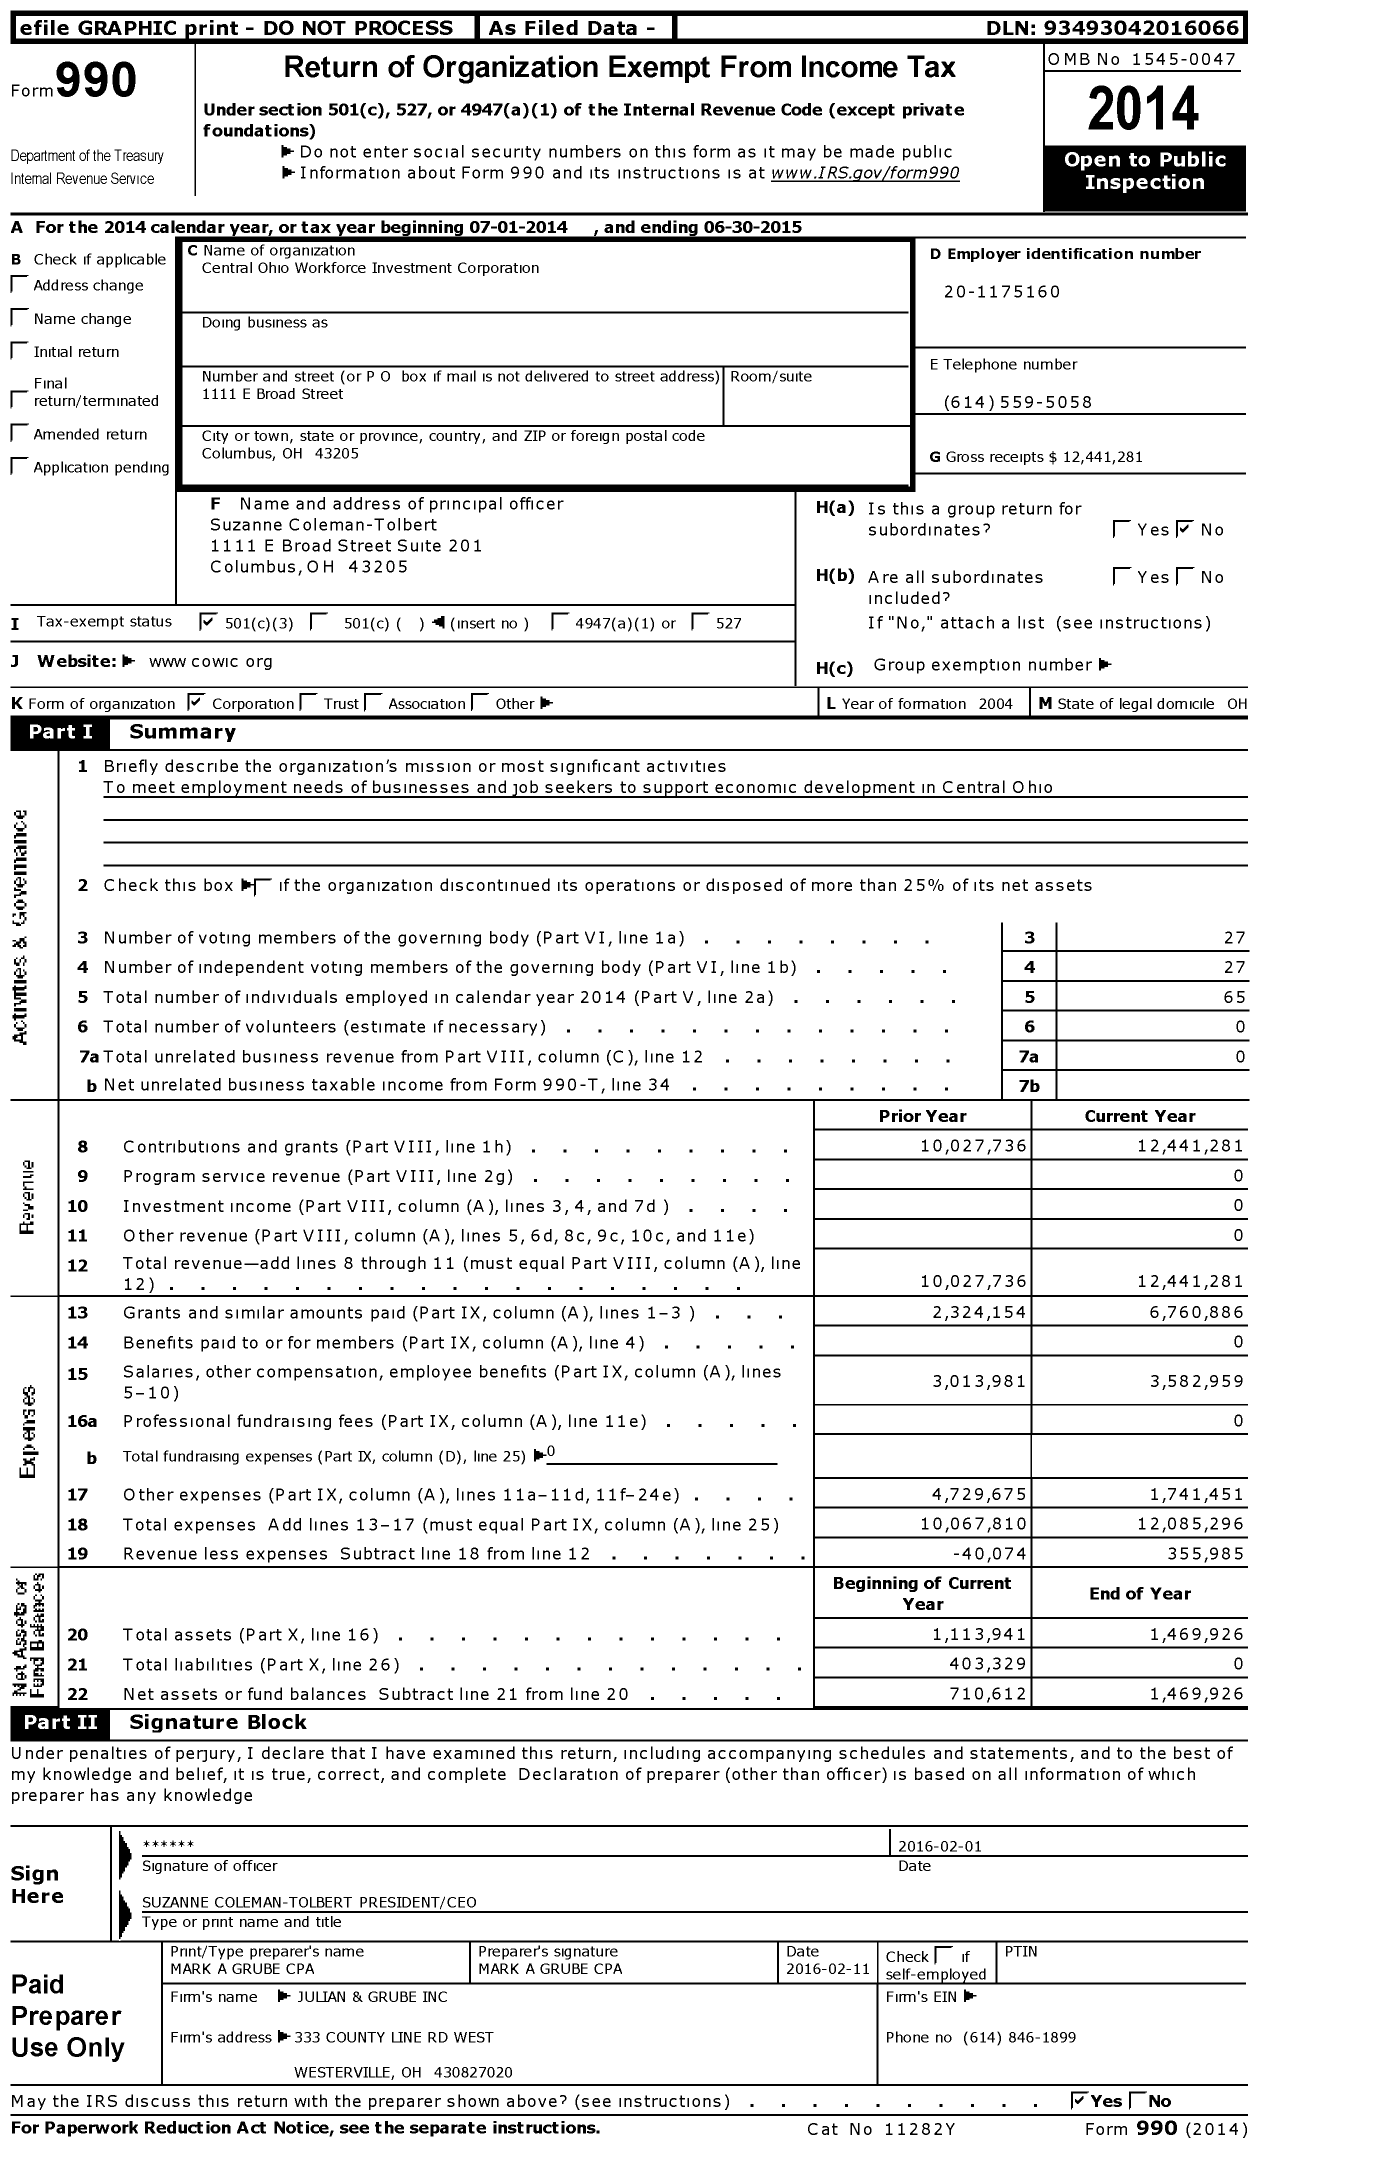 Image of first page of 2014 Form 990 for Central Ohio Workforce Investment Corporation (COWIC)